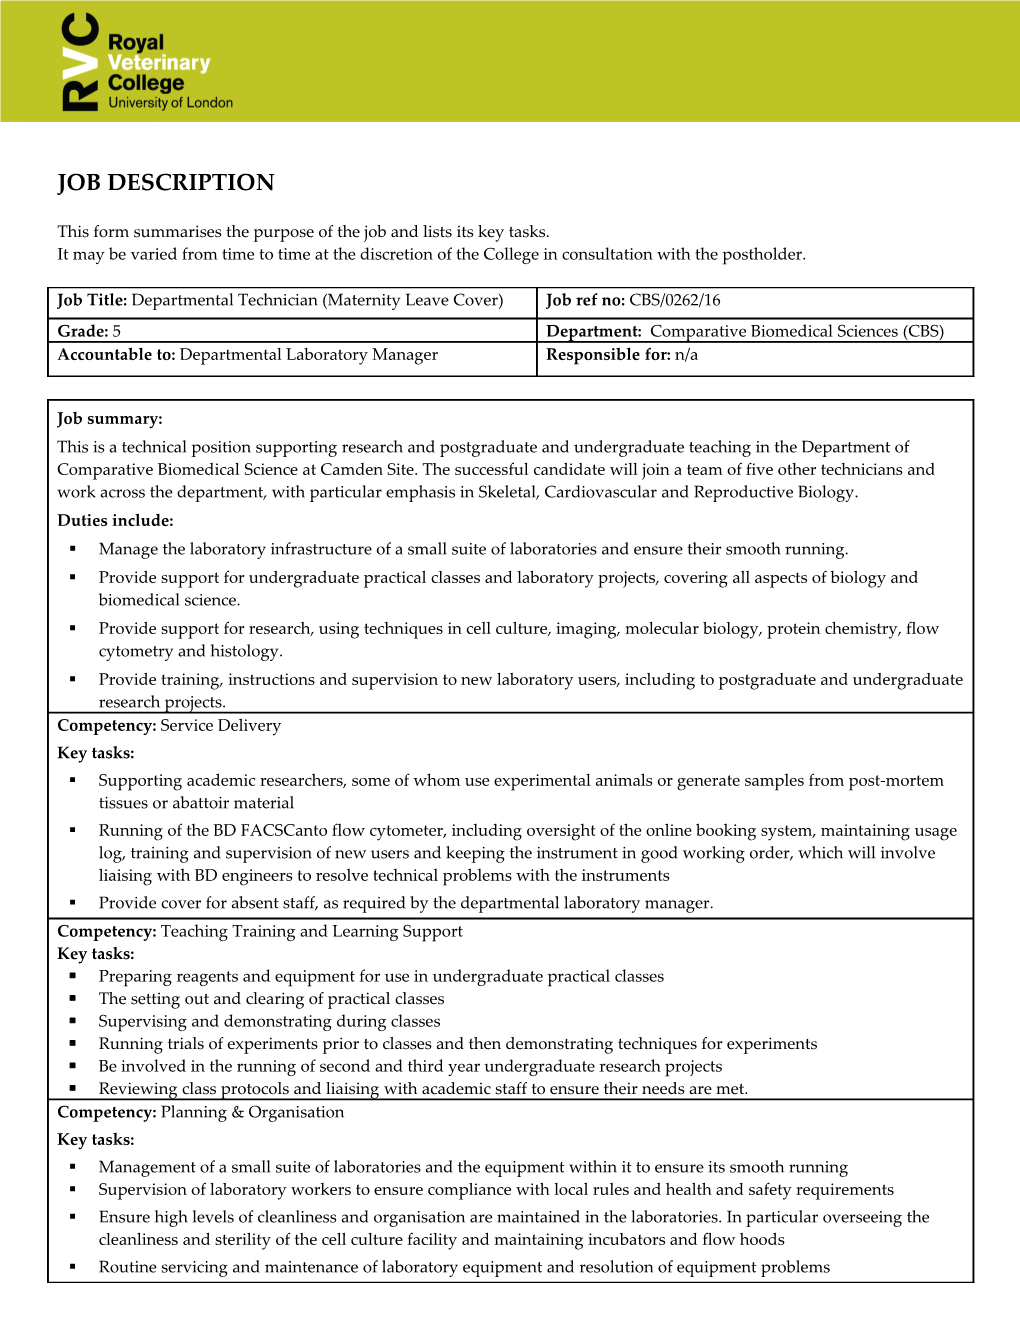 This Form Summarises the Purpose of the Job and Lists Its Key Tasks s2